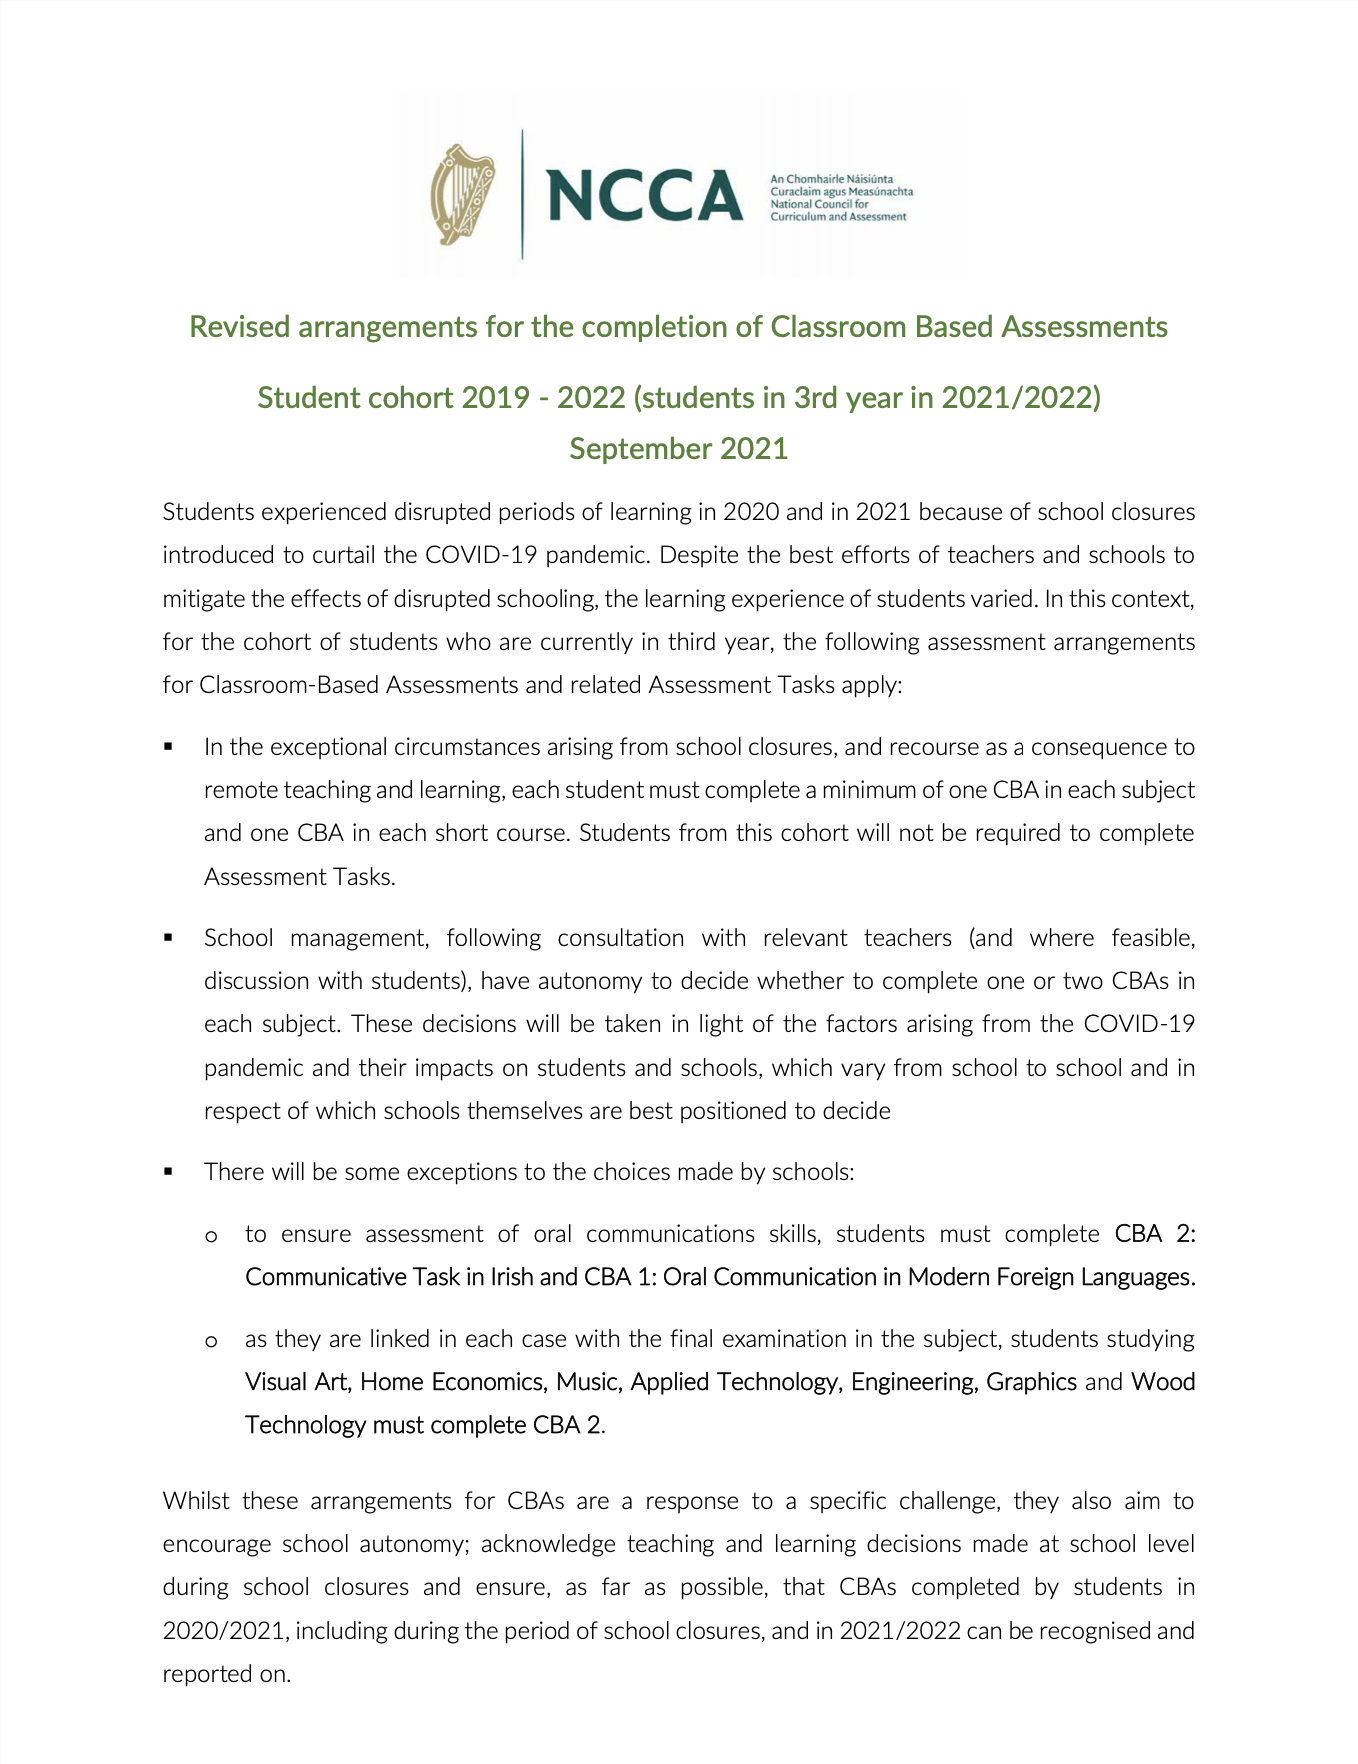 Revised Arrangements for the completion of Classroom-Based Assessments 2019 - 2022